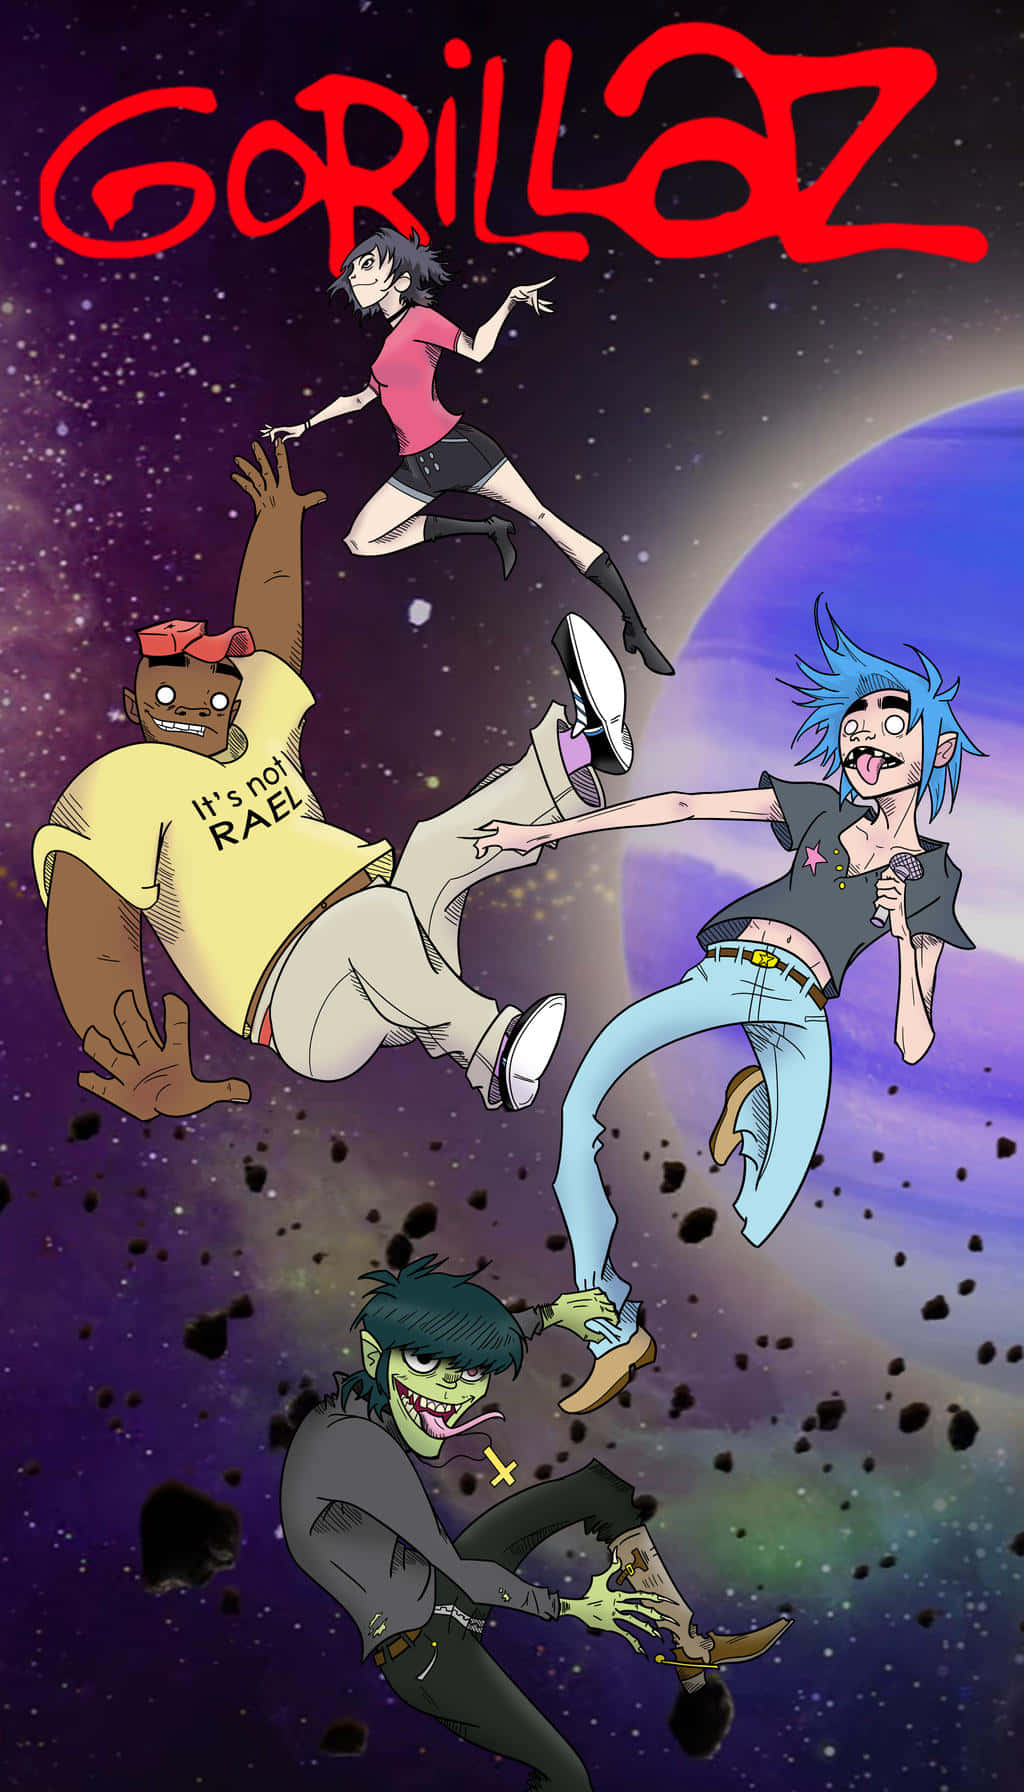 Get ready for a unique experience as Gorillaz takes you on a journey to a magical animated world!